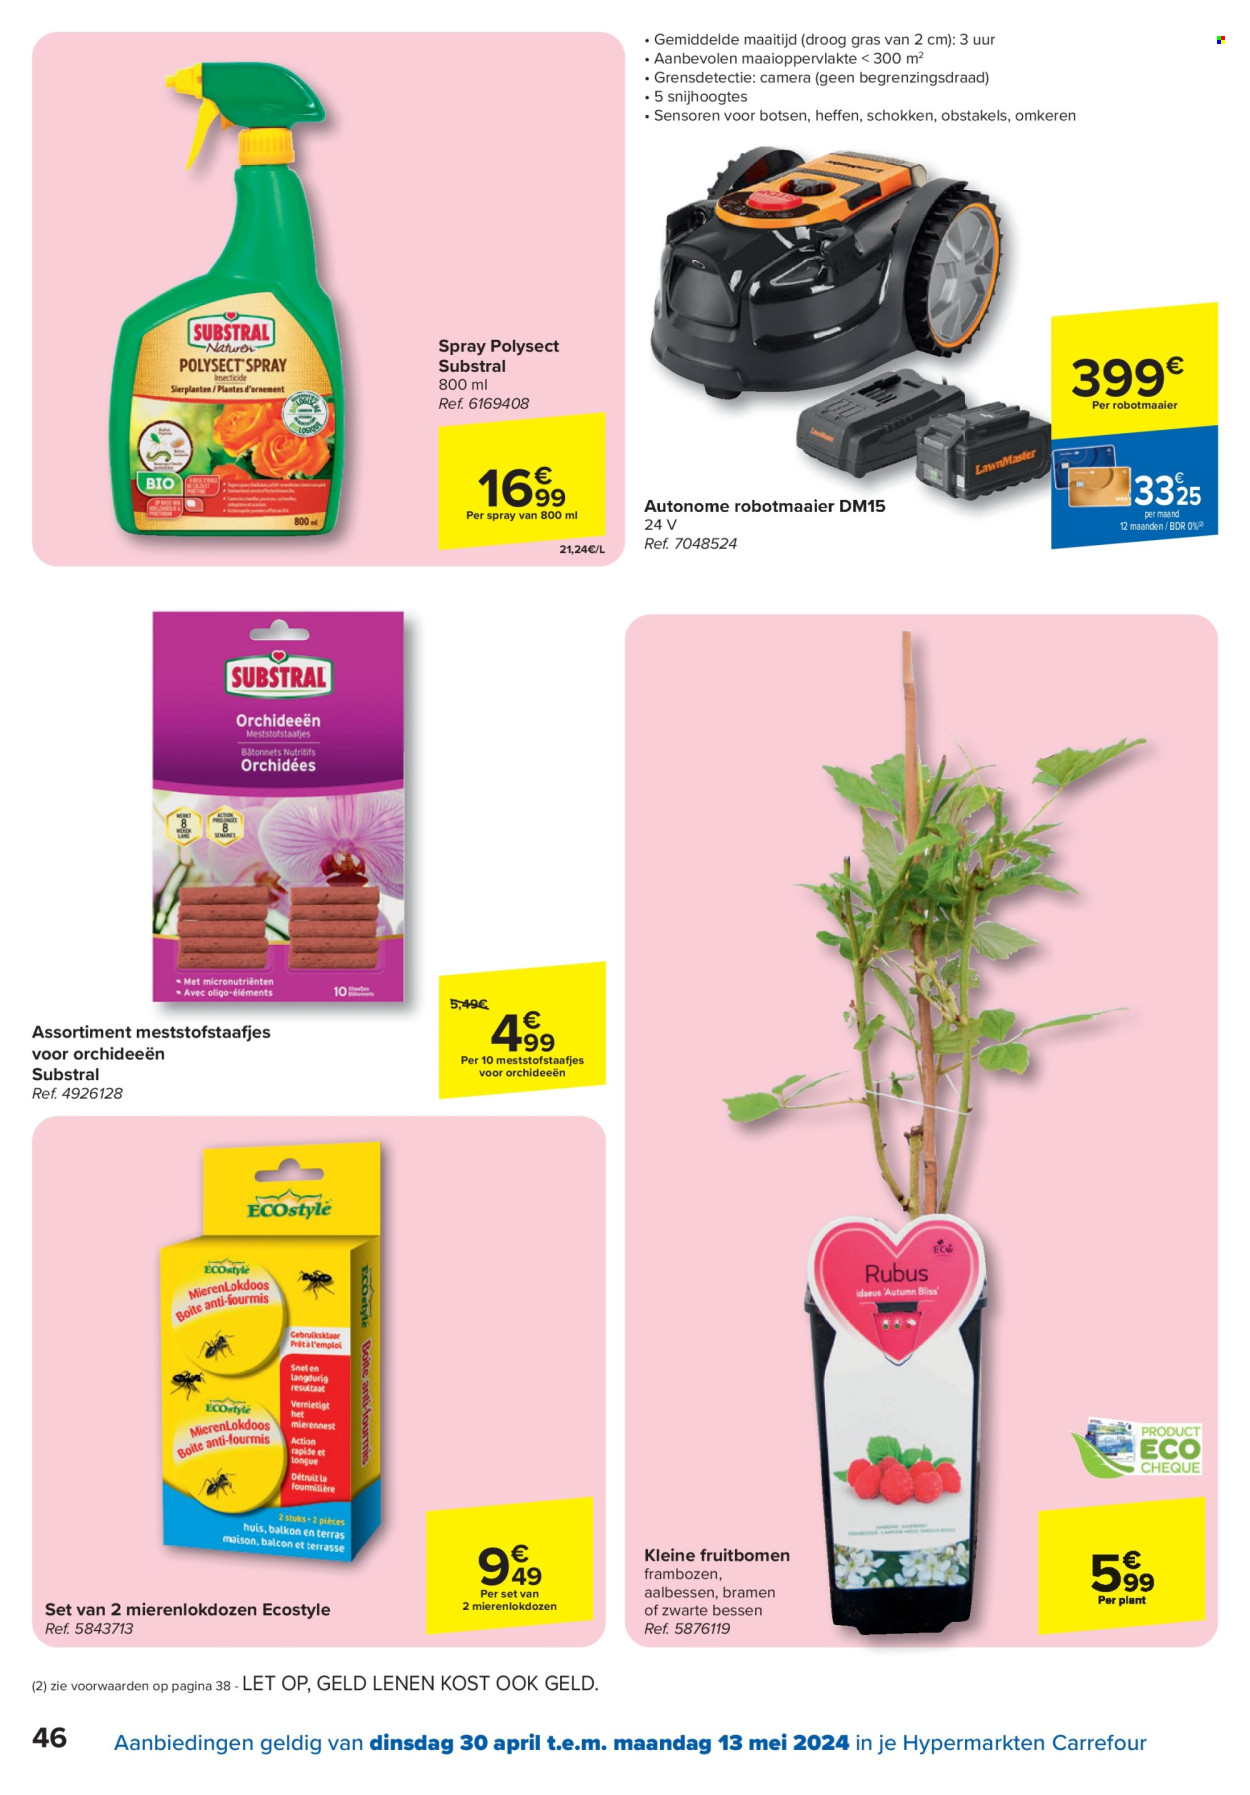 Catalogue Carrefour hypermarkt - 30.4.2024 - 13.5.2024. Page 46.